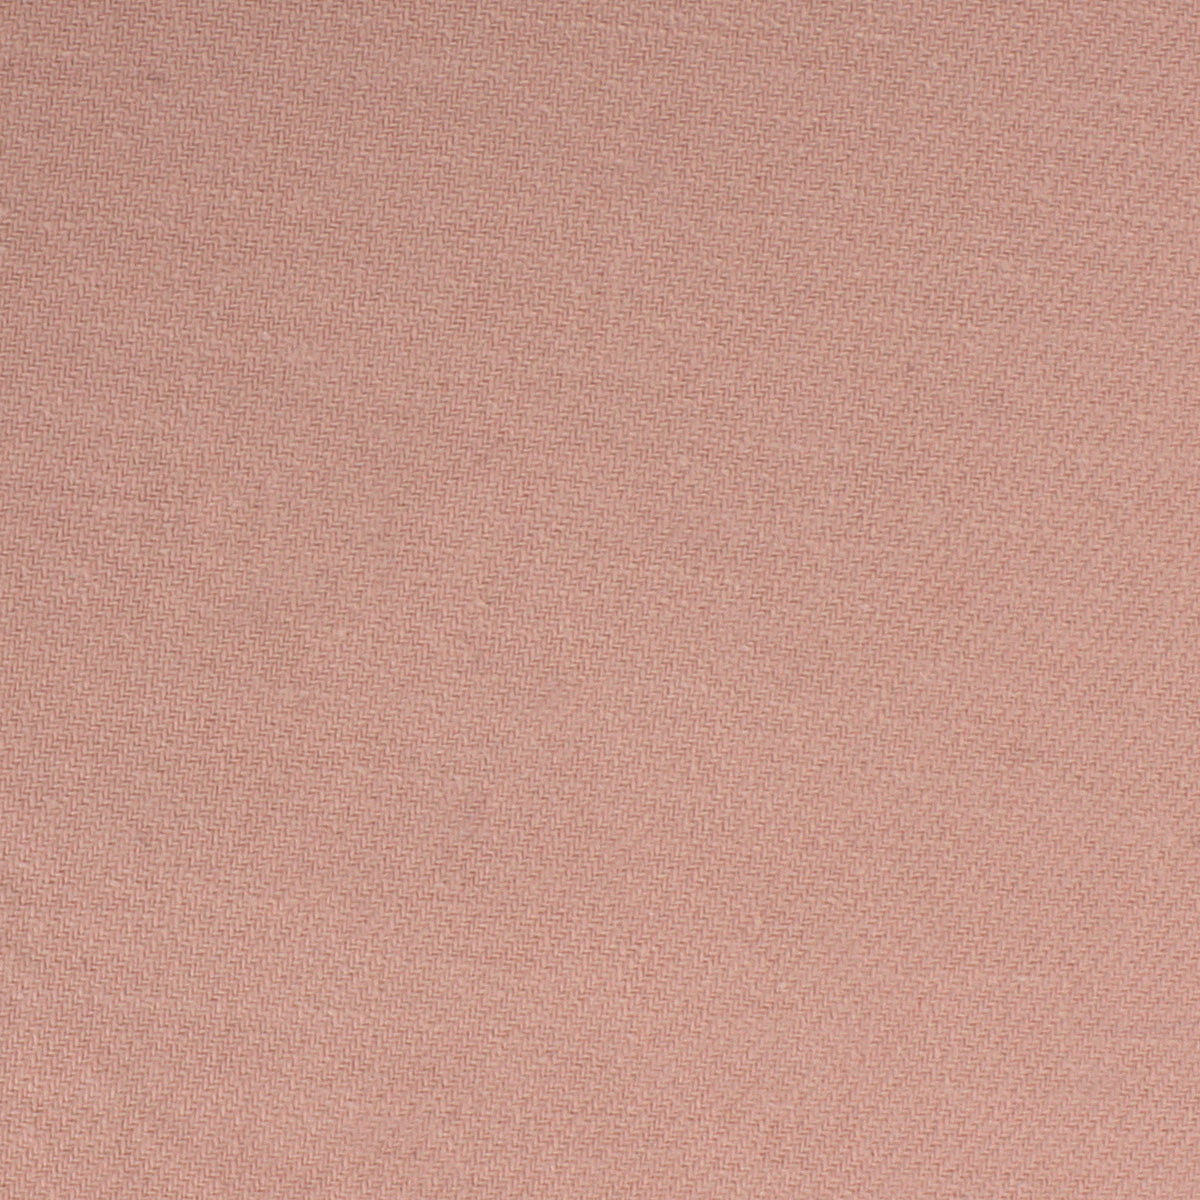 Dusty Rose Pink Pocket Square Fabric